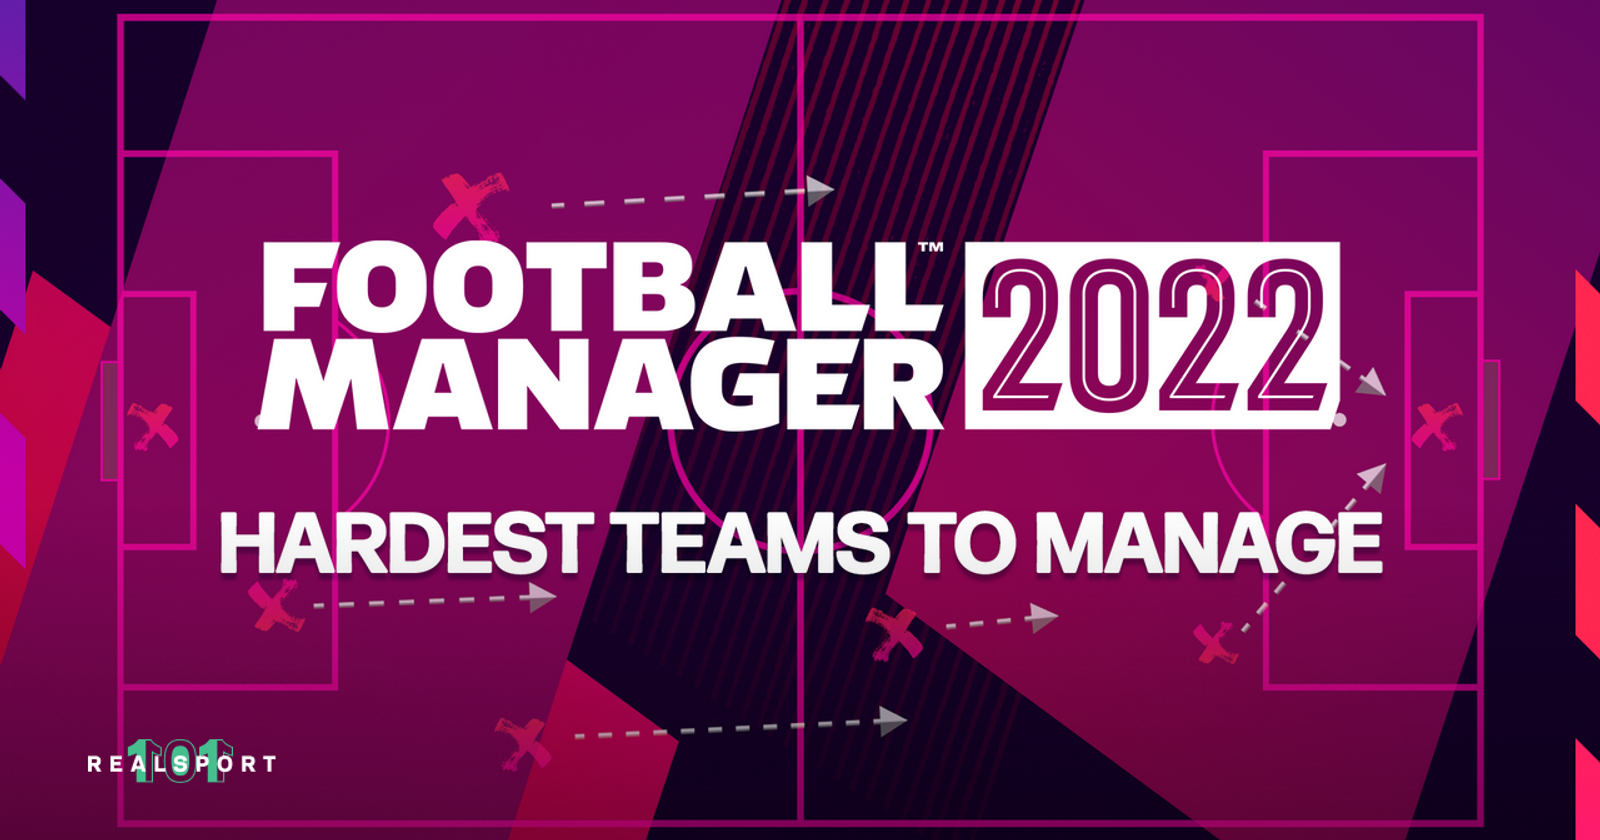 Teams You Must Manage in FM22 - Derby County, FM Blog